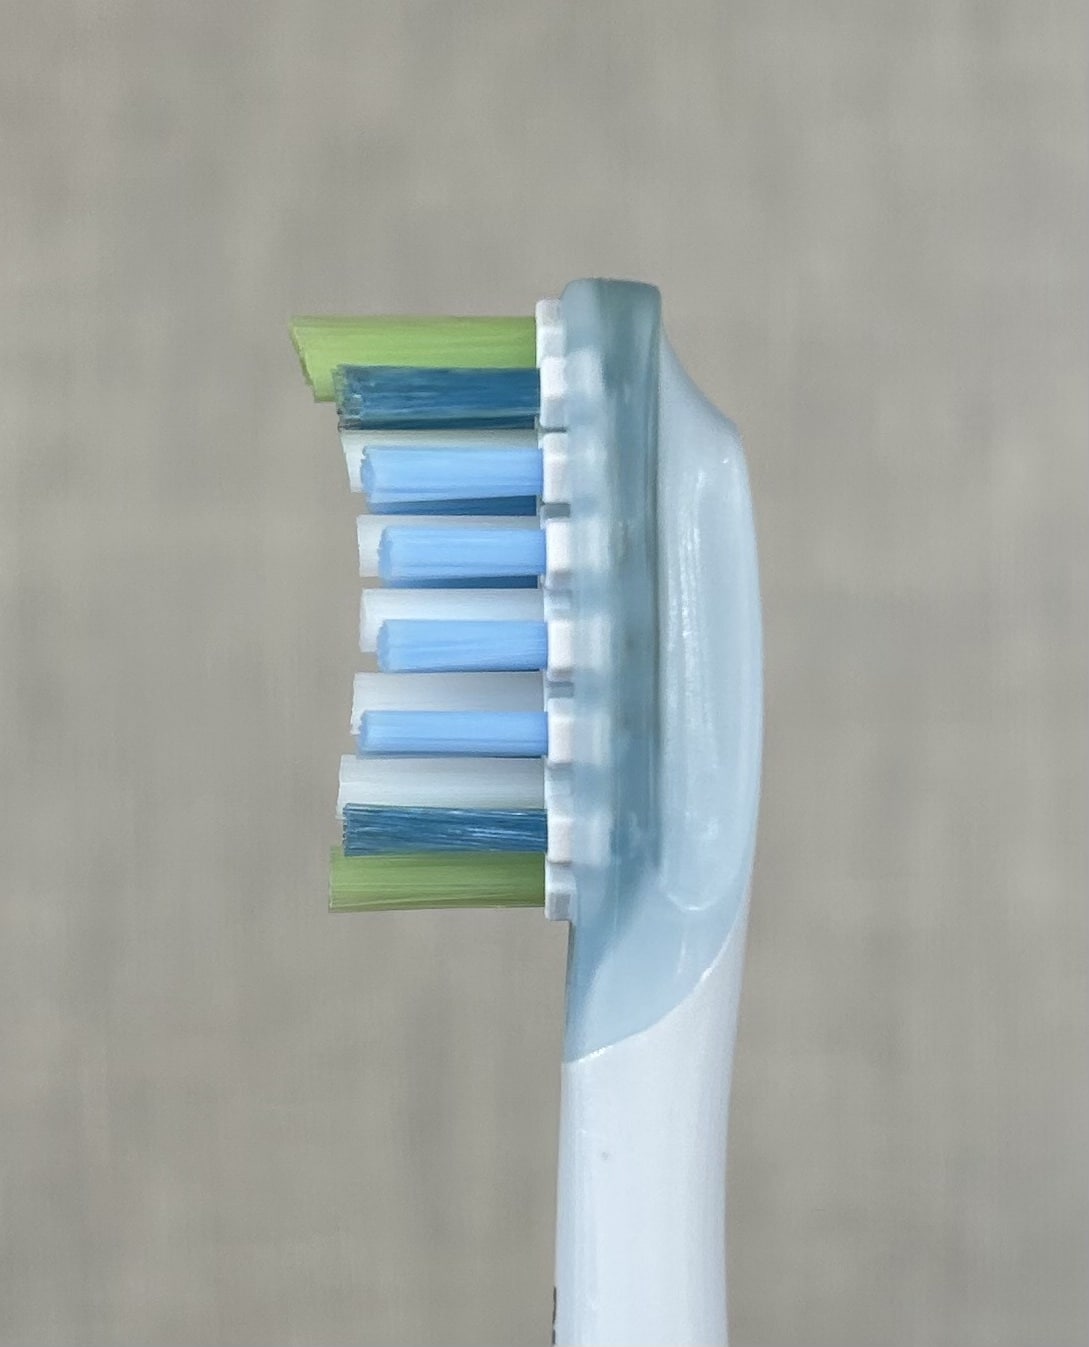 Philips Sonicare 7500 Electric Toothbrush Review | My Dental Advocate